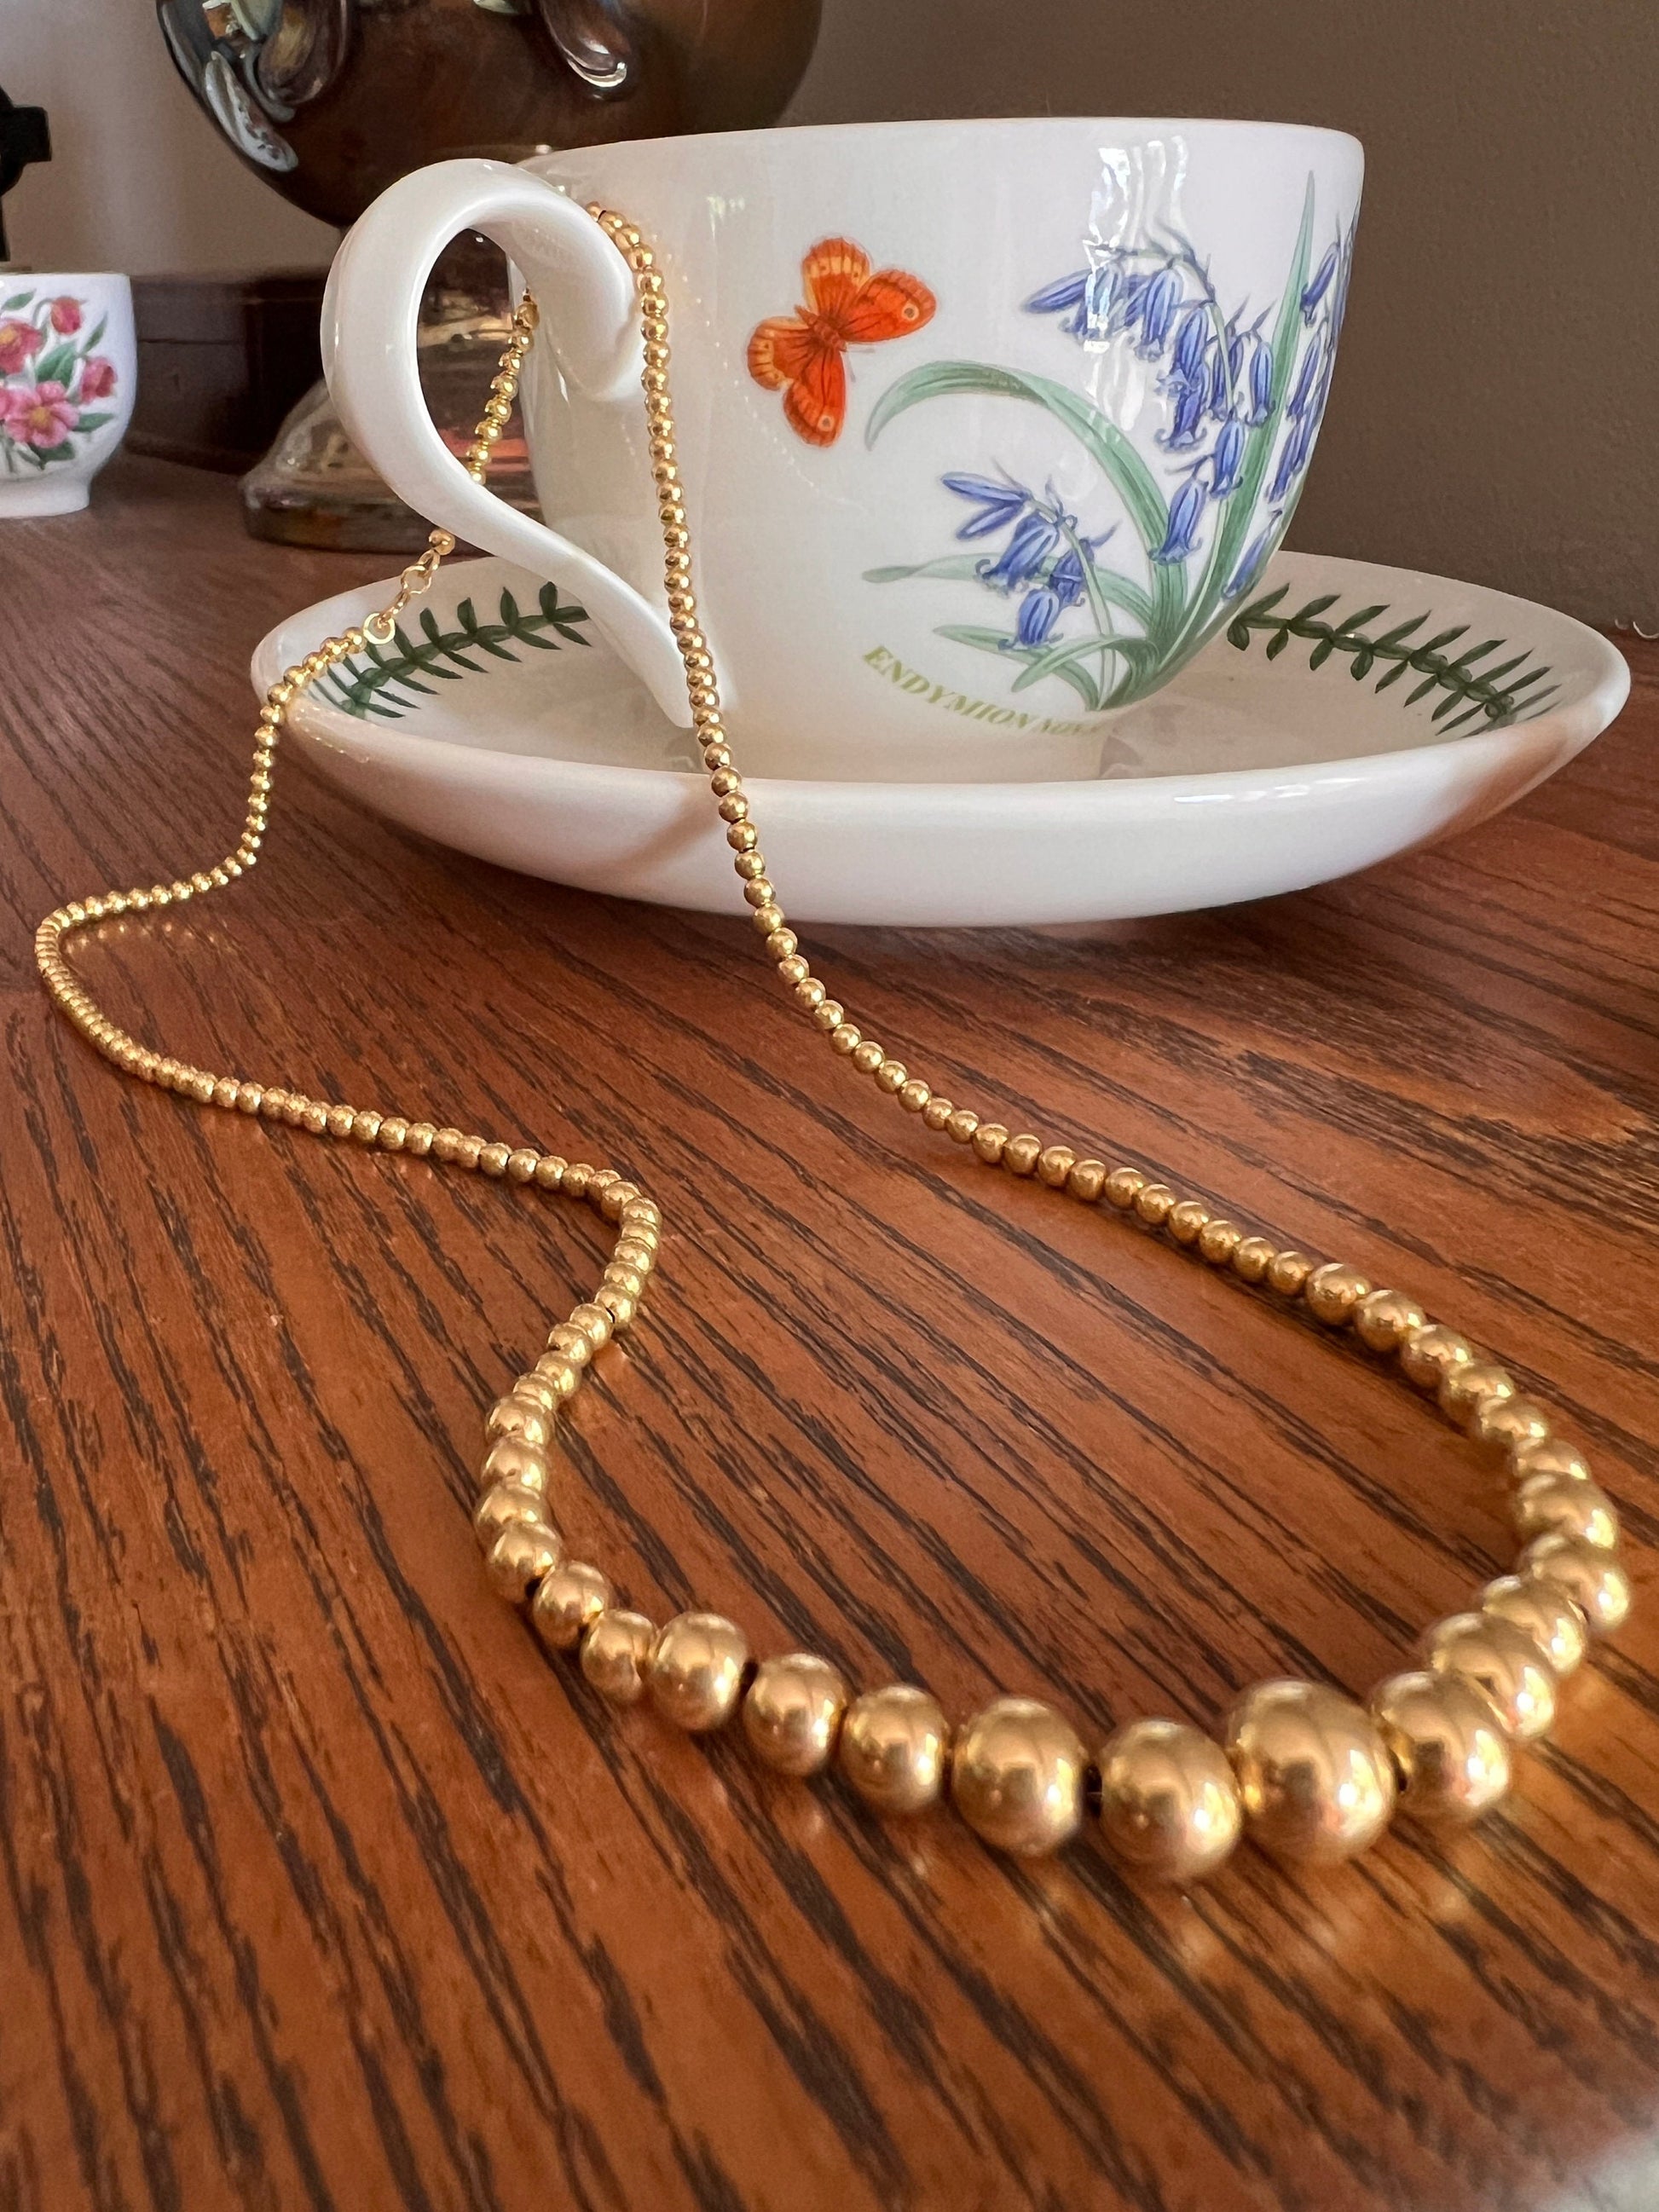 French VINTAGE 6g 18k GOLD Solid 17.5" Traditional Marseille Necklace Grain of Gold Graduated Beads Choker Collar Chain Neckmess Love Gift